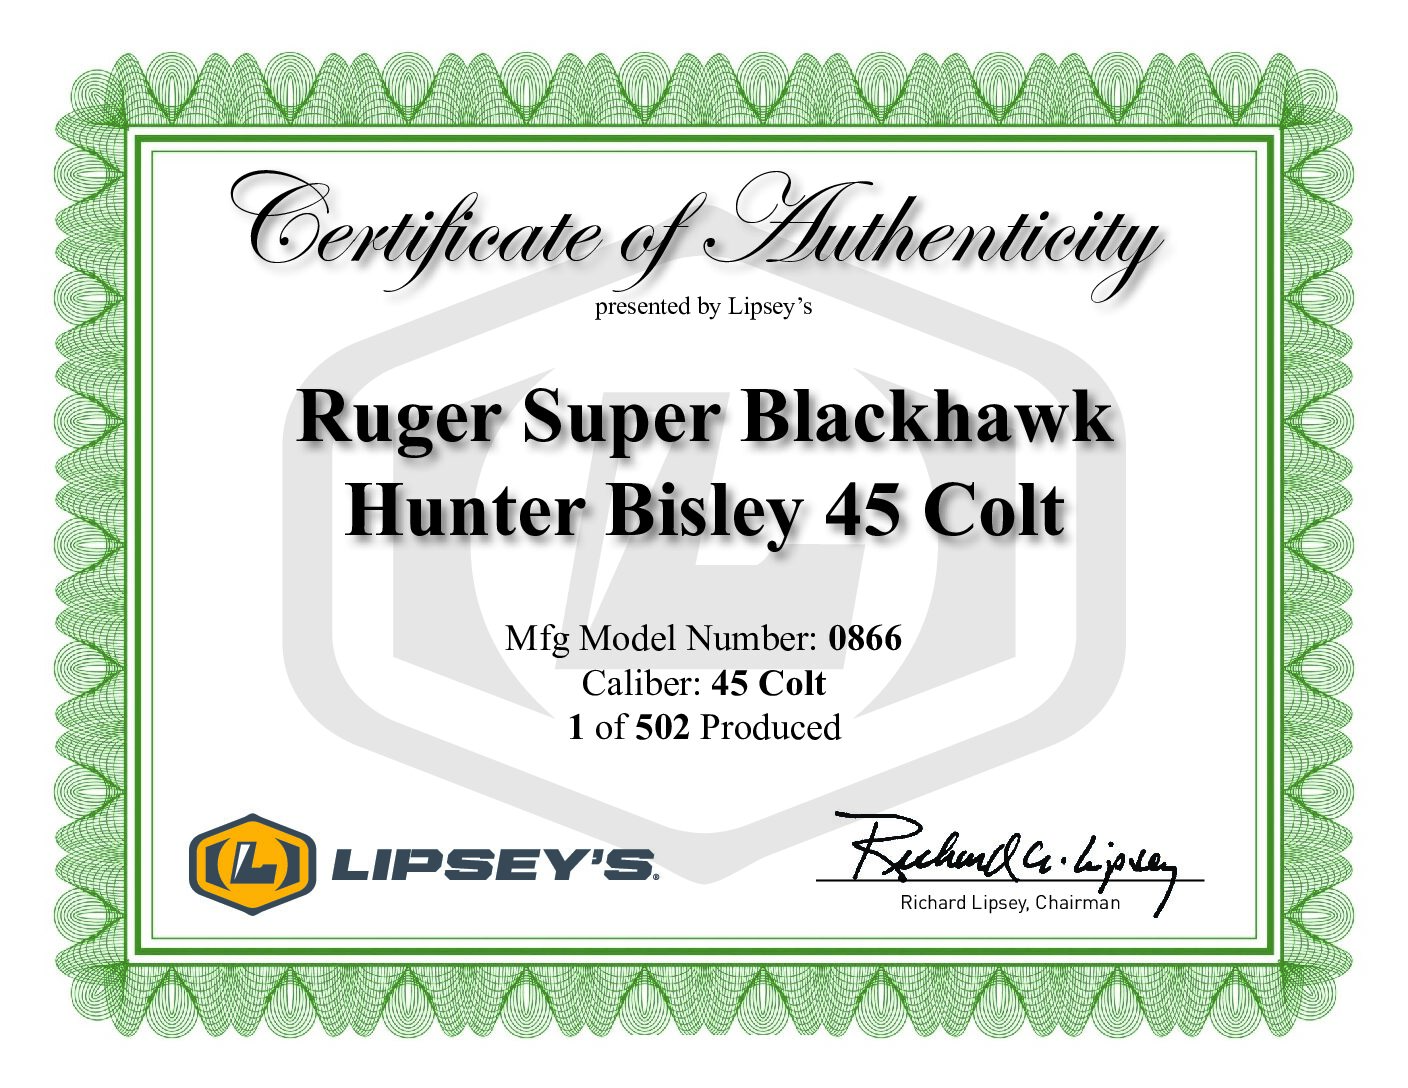 Lipsey's Exclusive Ruger Certificate of Authenticity 